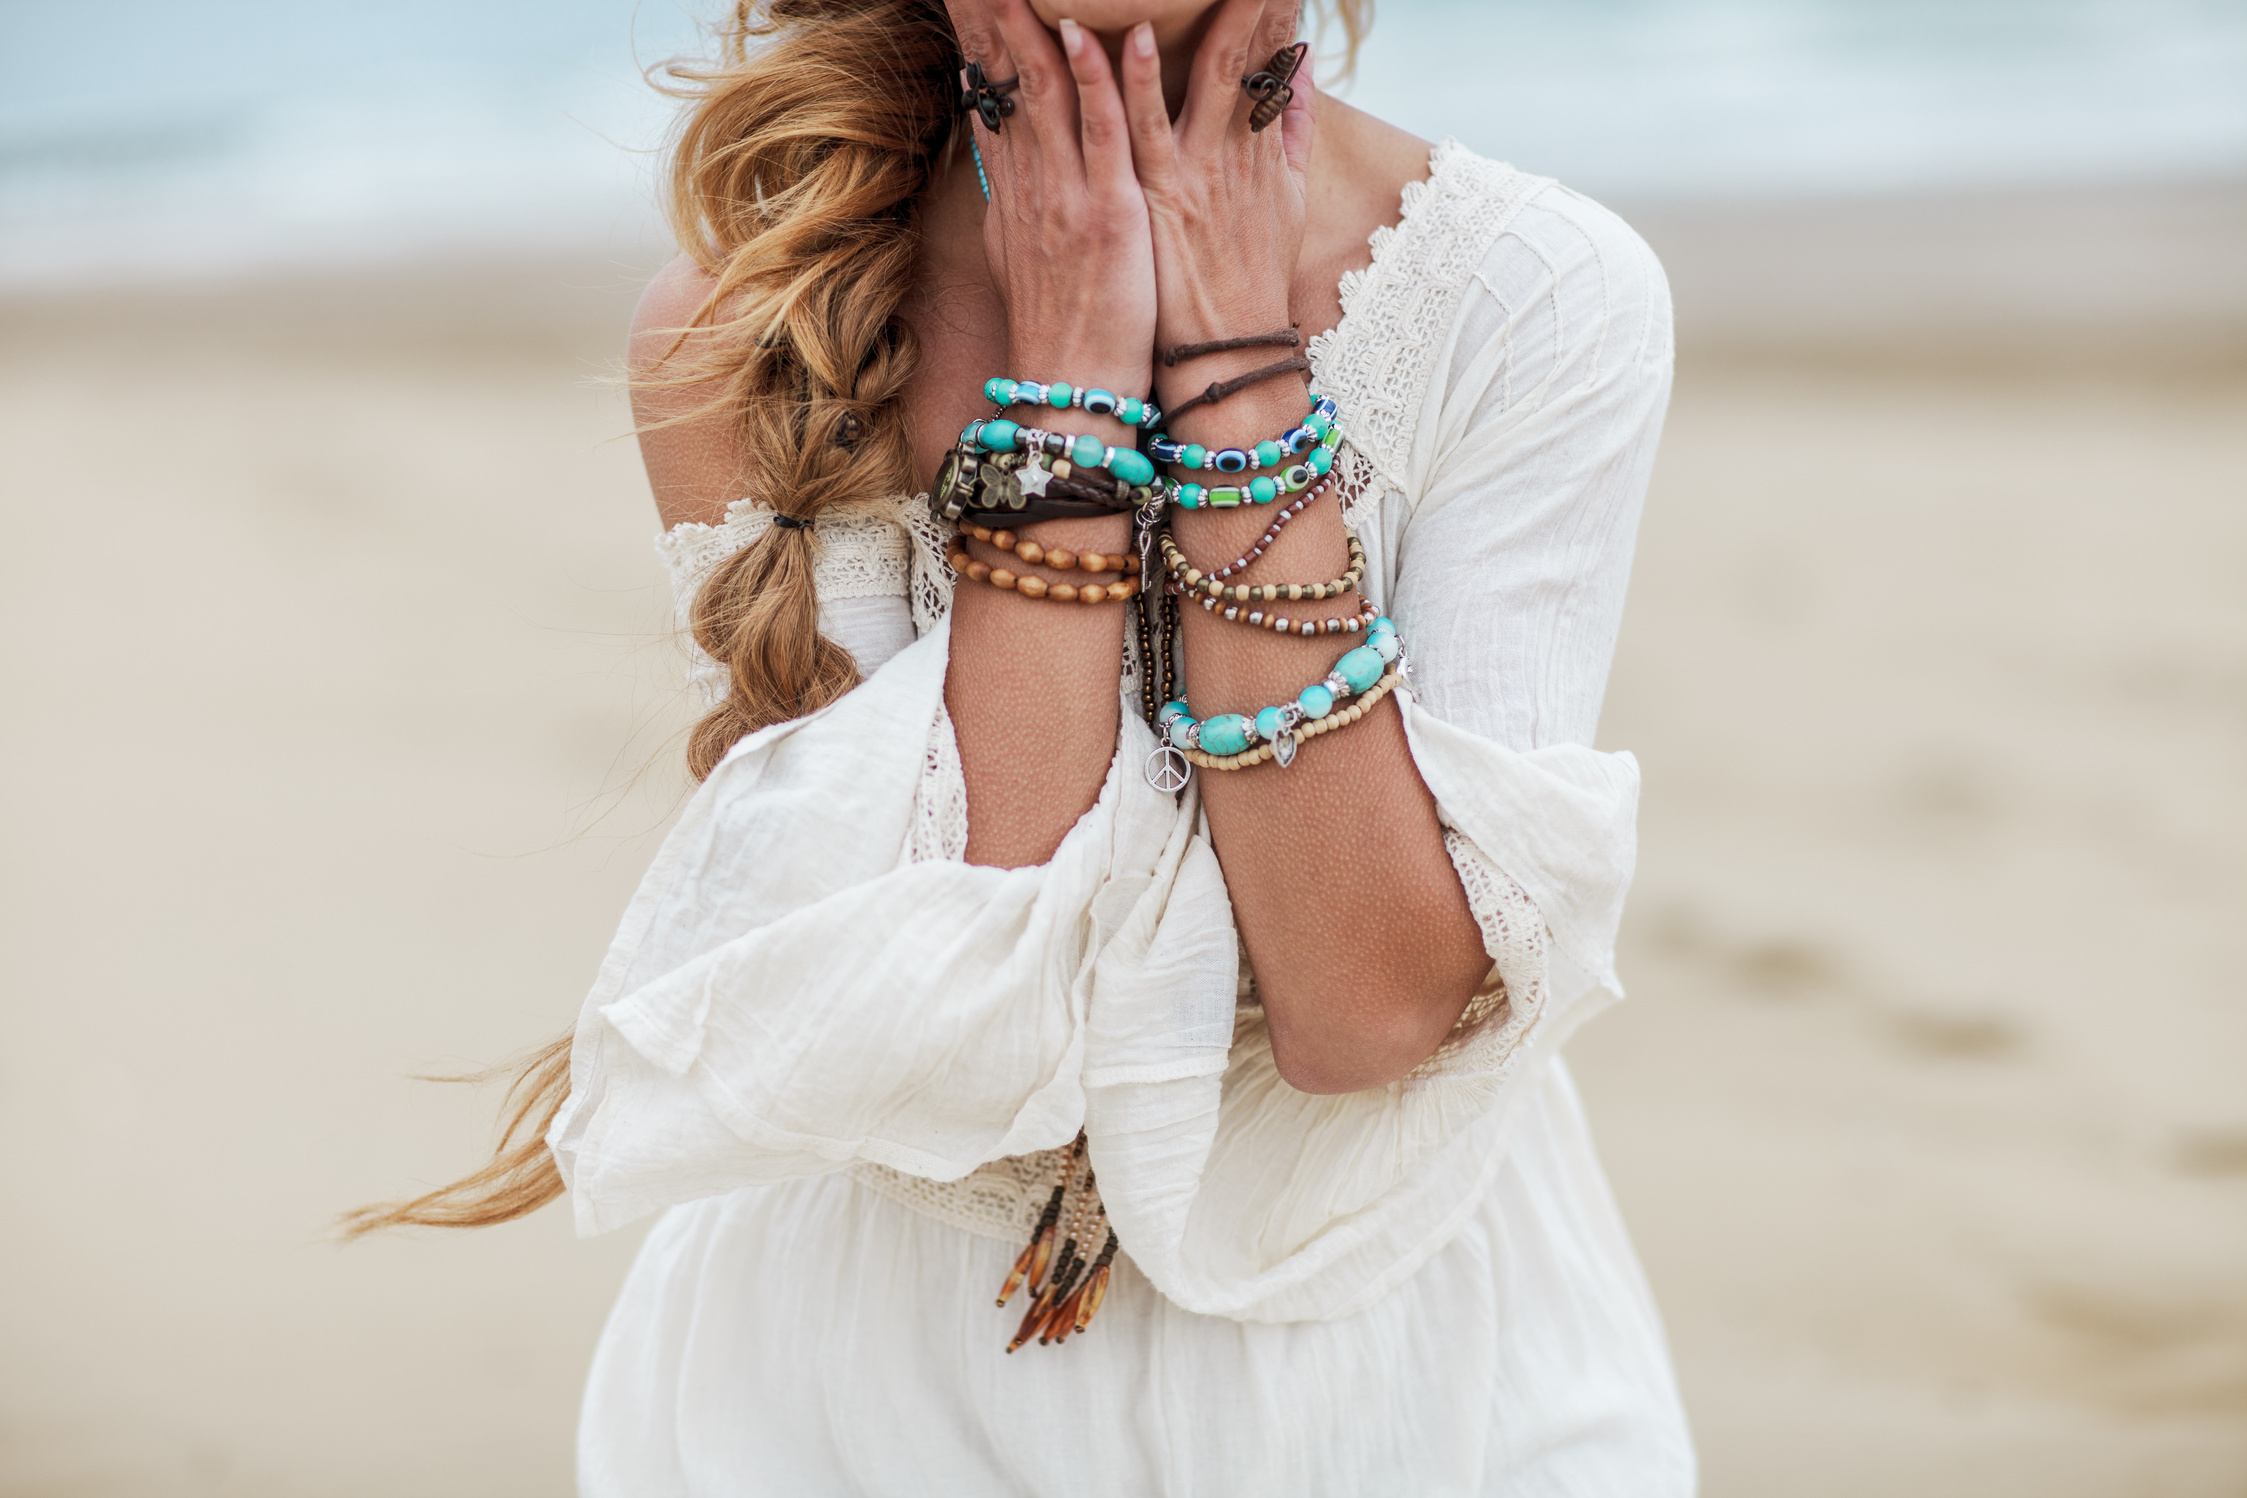 Boho woman with multicolored jewelry